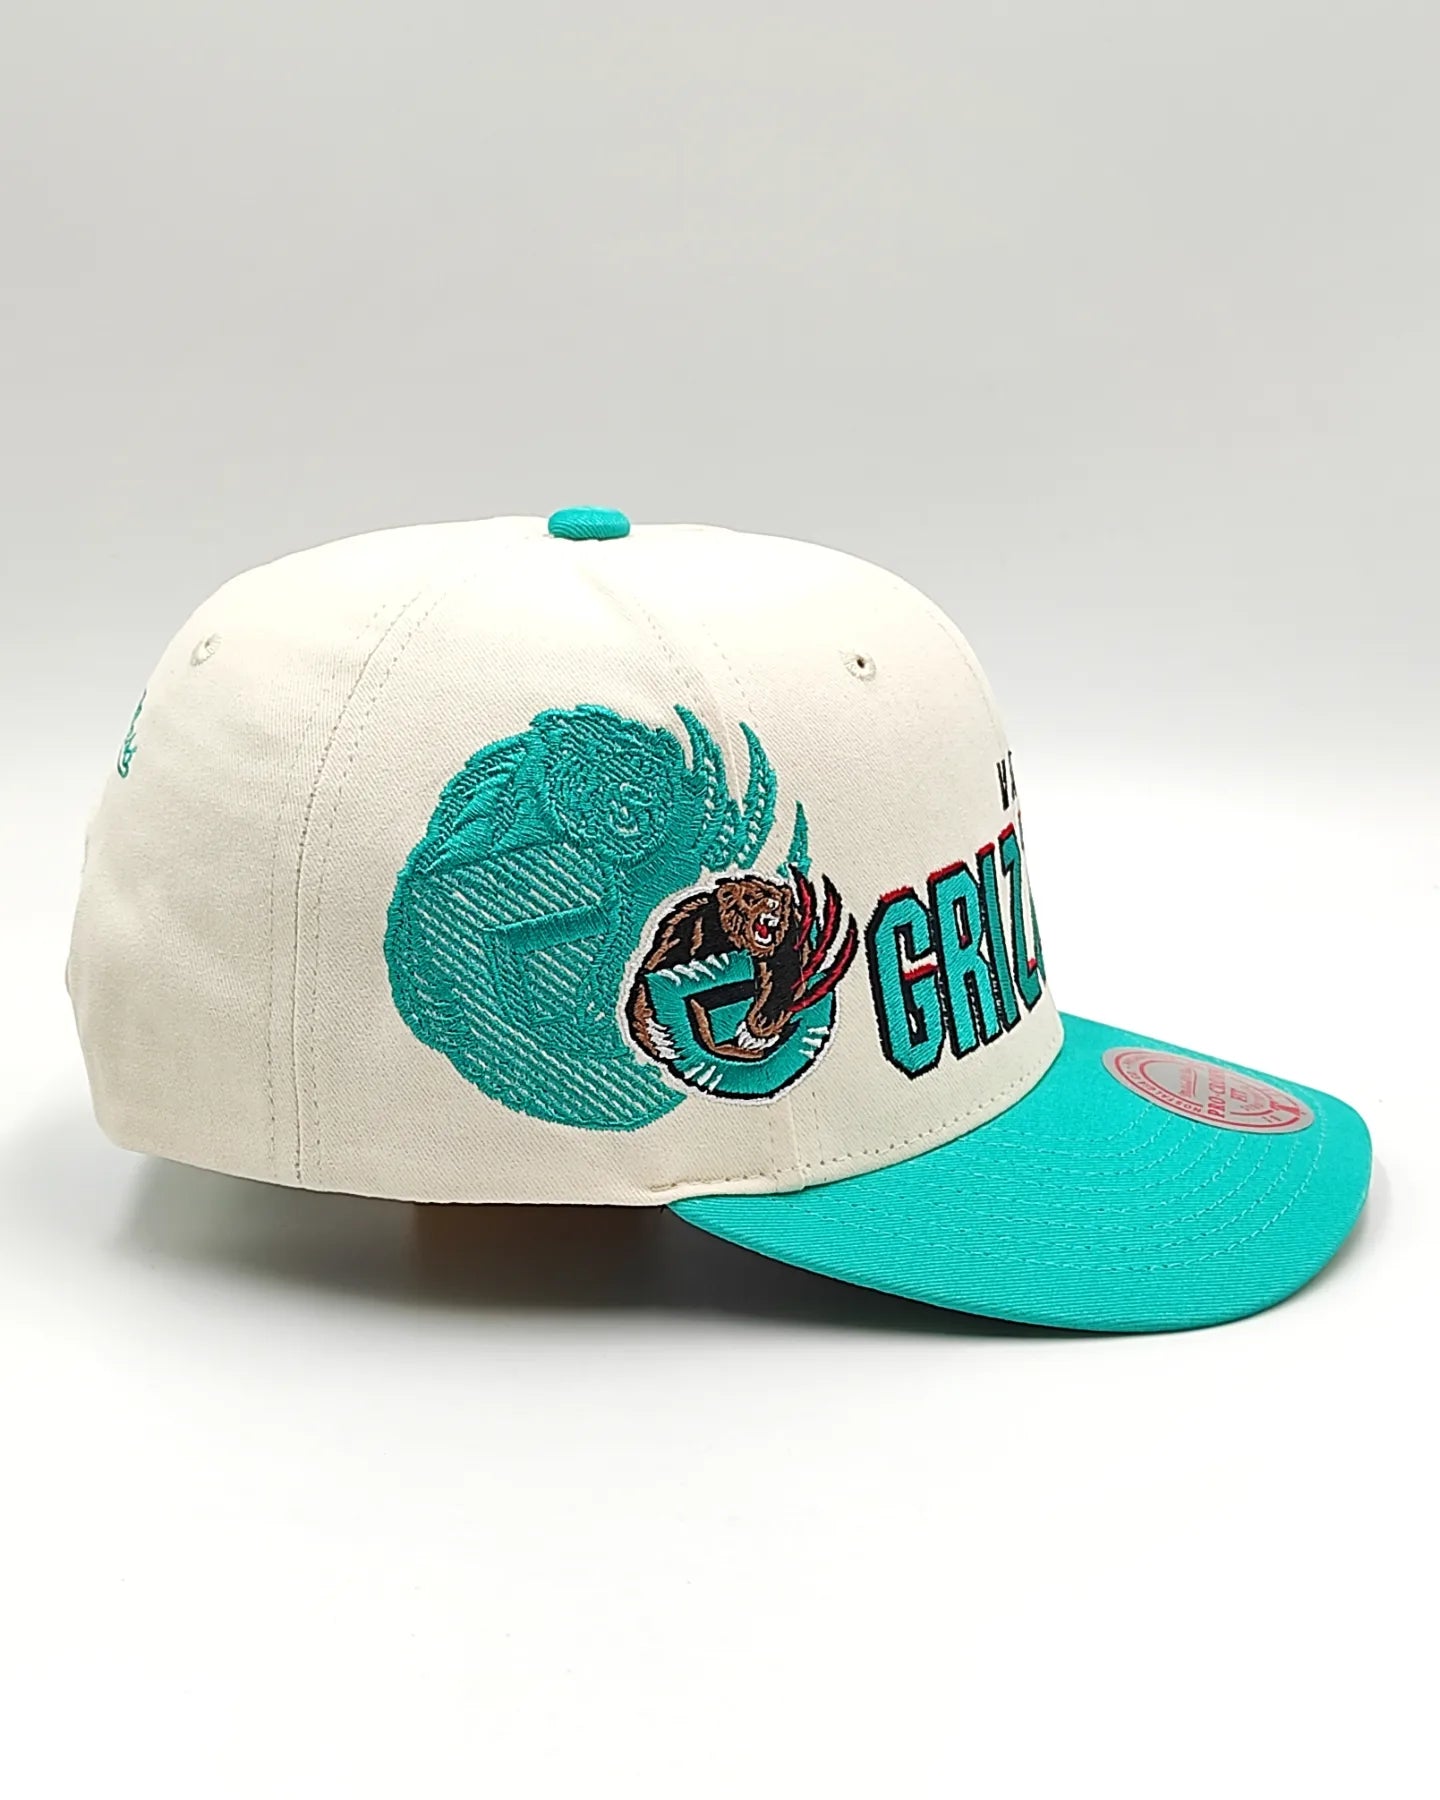 Mitchell And ness Vancouver Grizzlies '96 Draft' Pro Crown Snapback